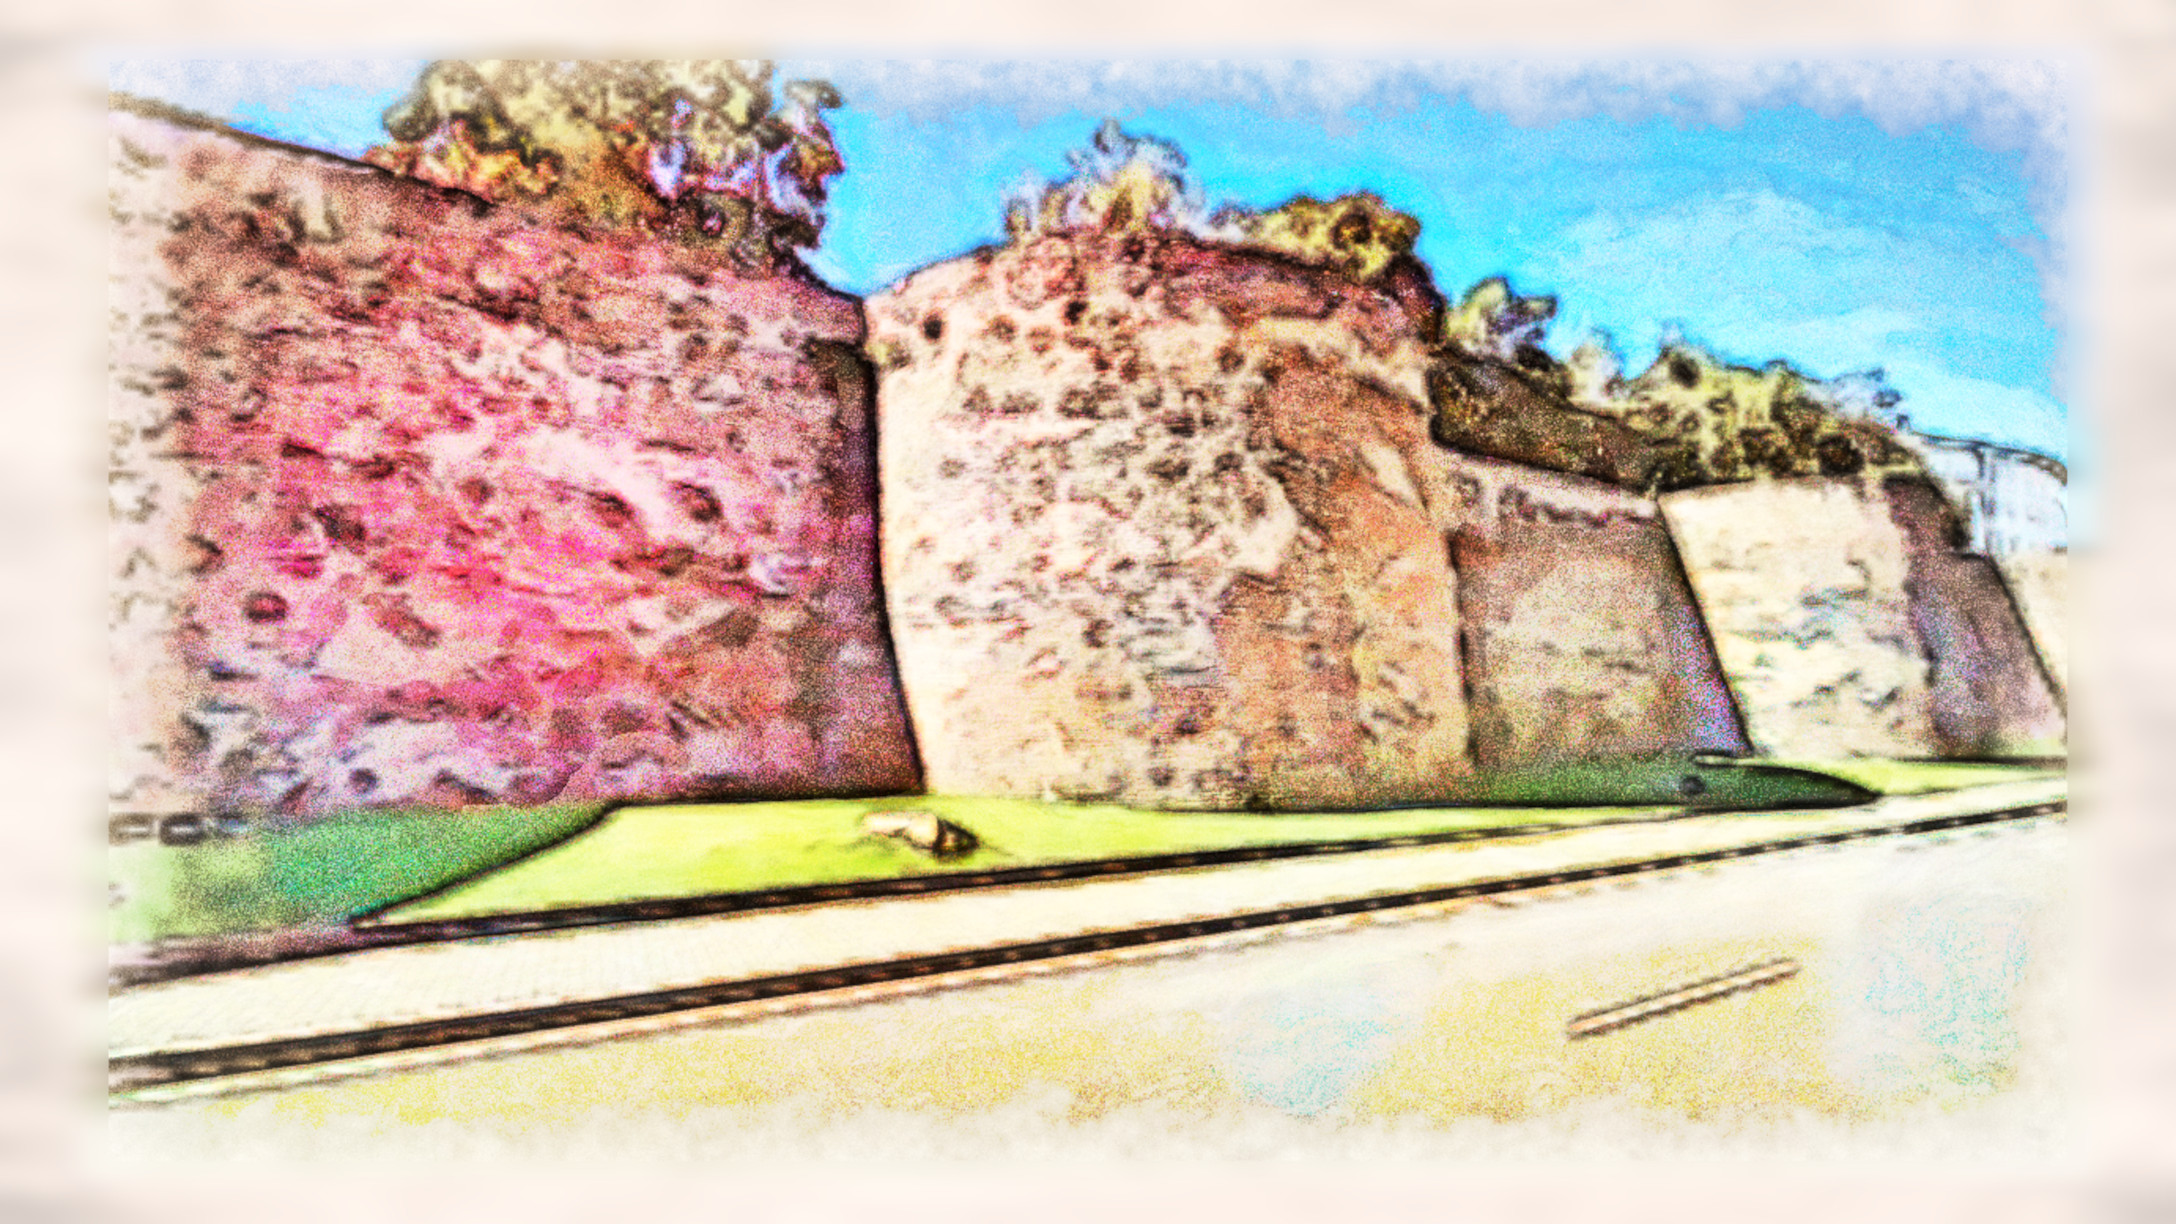 2023-09-30 21-06-18_Lugo_AncientWall with a Watercolor Pastels Effect 2023 (4.0,75.0,32.0,50.0,10.0,8.0,75.0,True,0).JPG